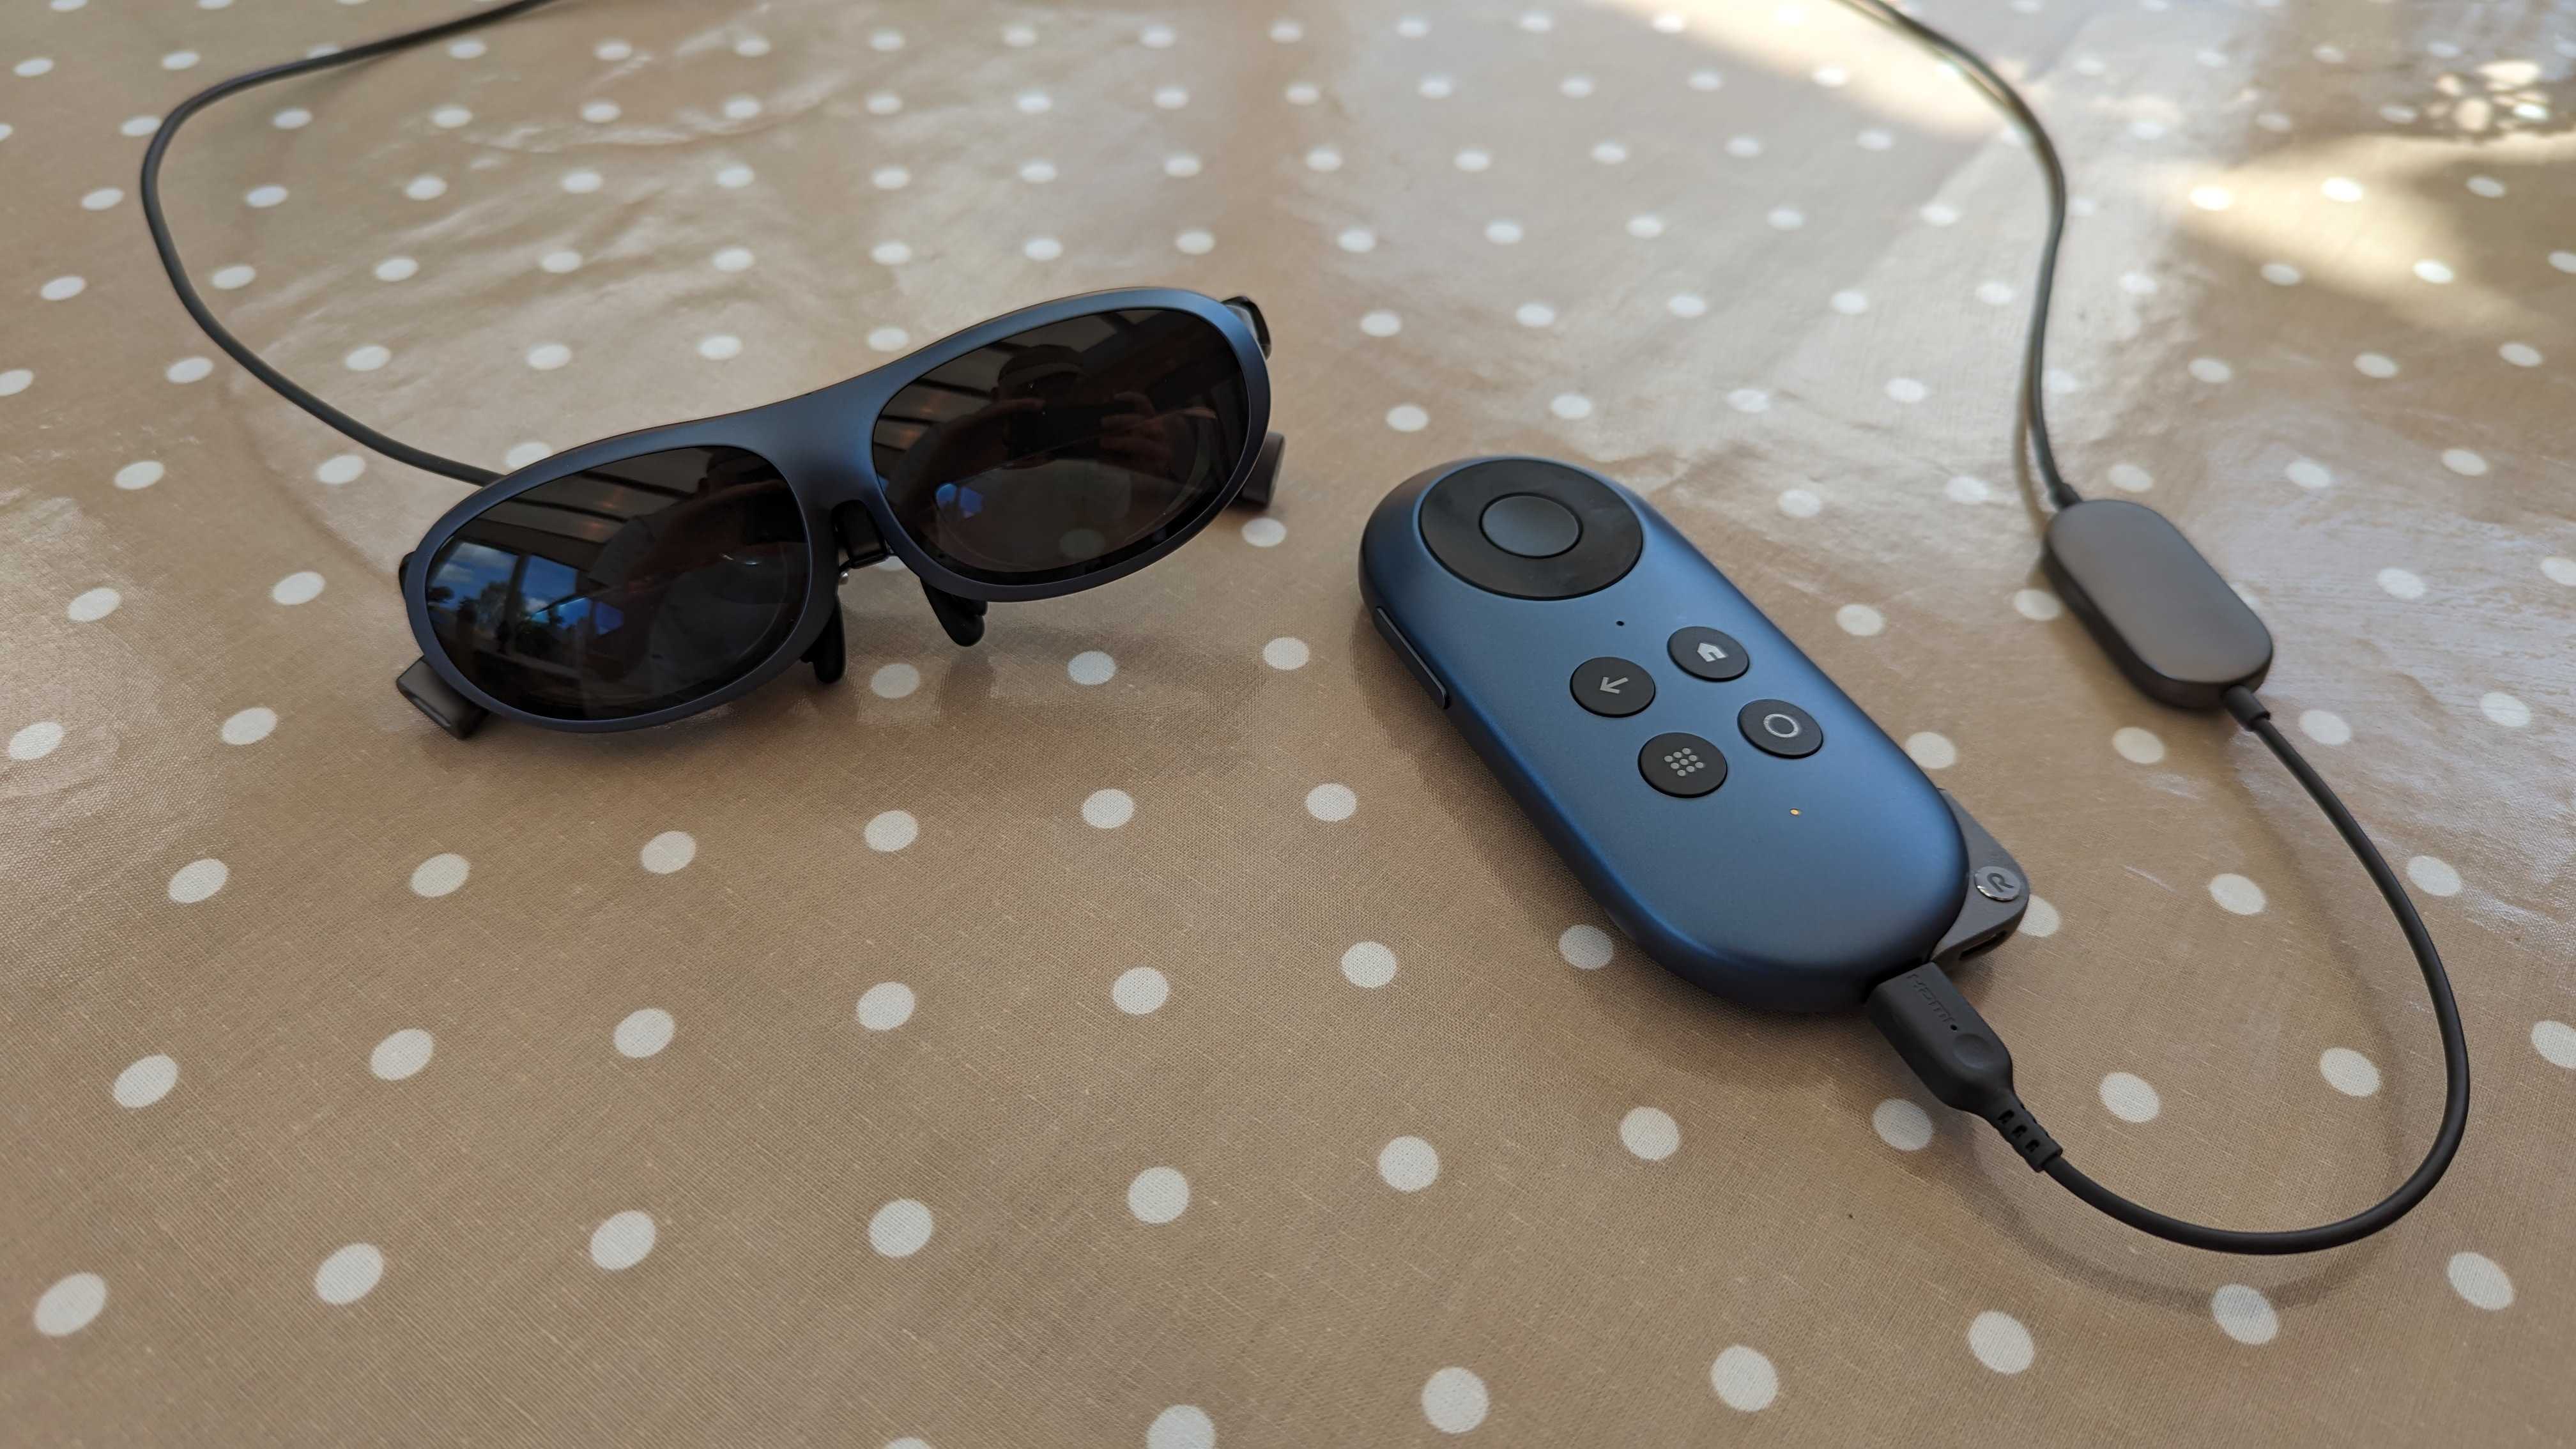 XREAL Air AR glasses review: Cool and futuristic, but too many